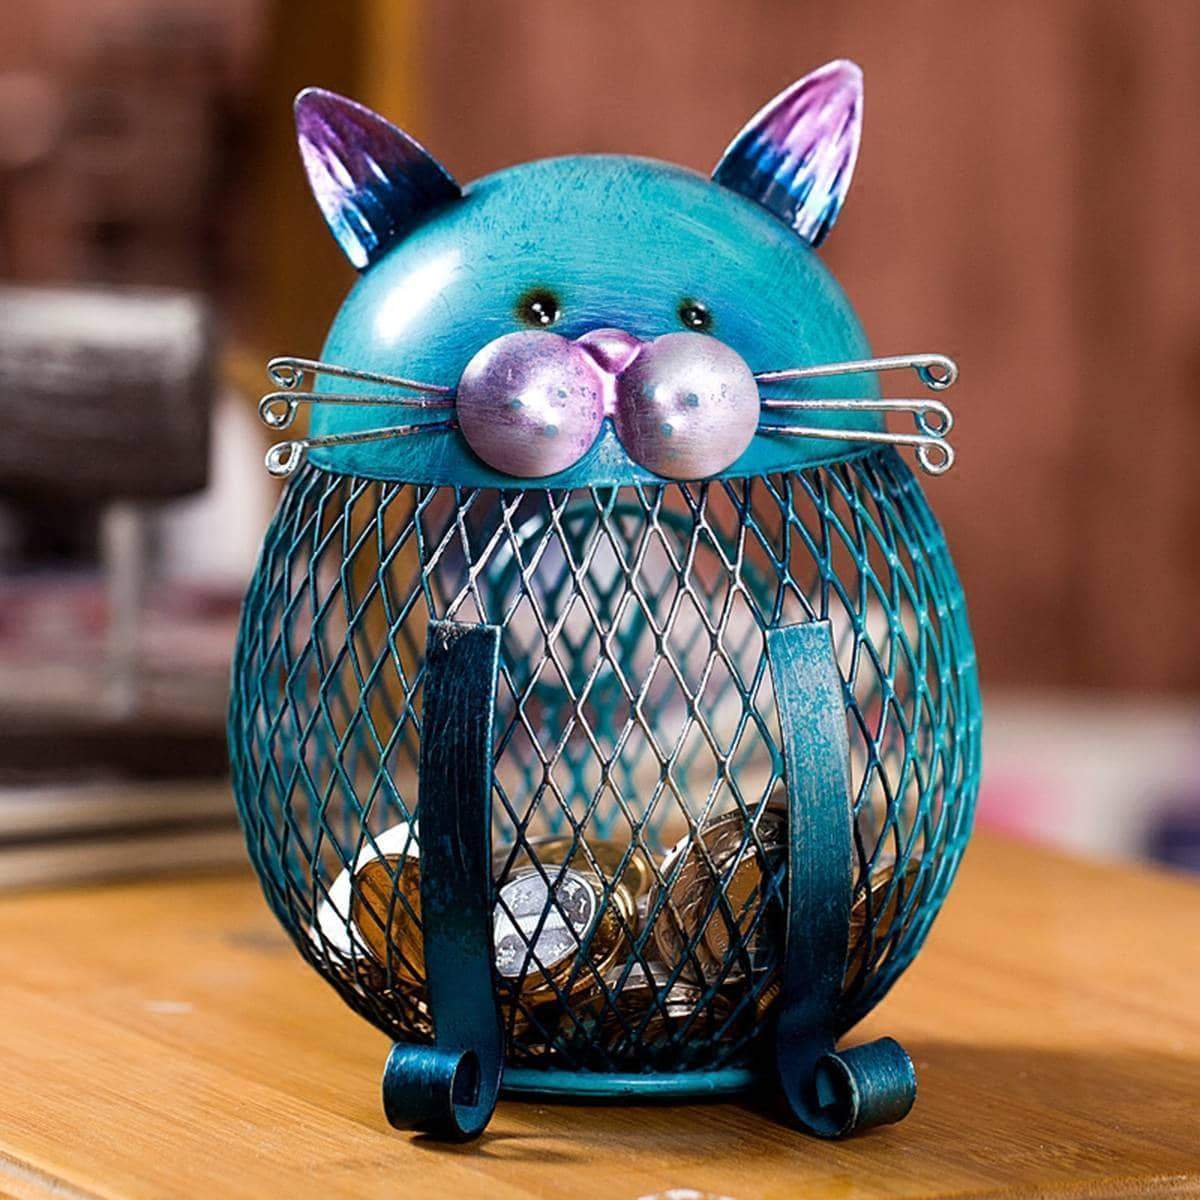 This cat piggy bank is made of sturdy iron and is painted with an environmentally friendly baked paint to ensure the beautiful blue color stays bright and vibrant.